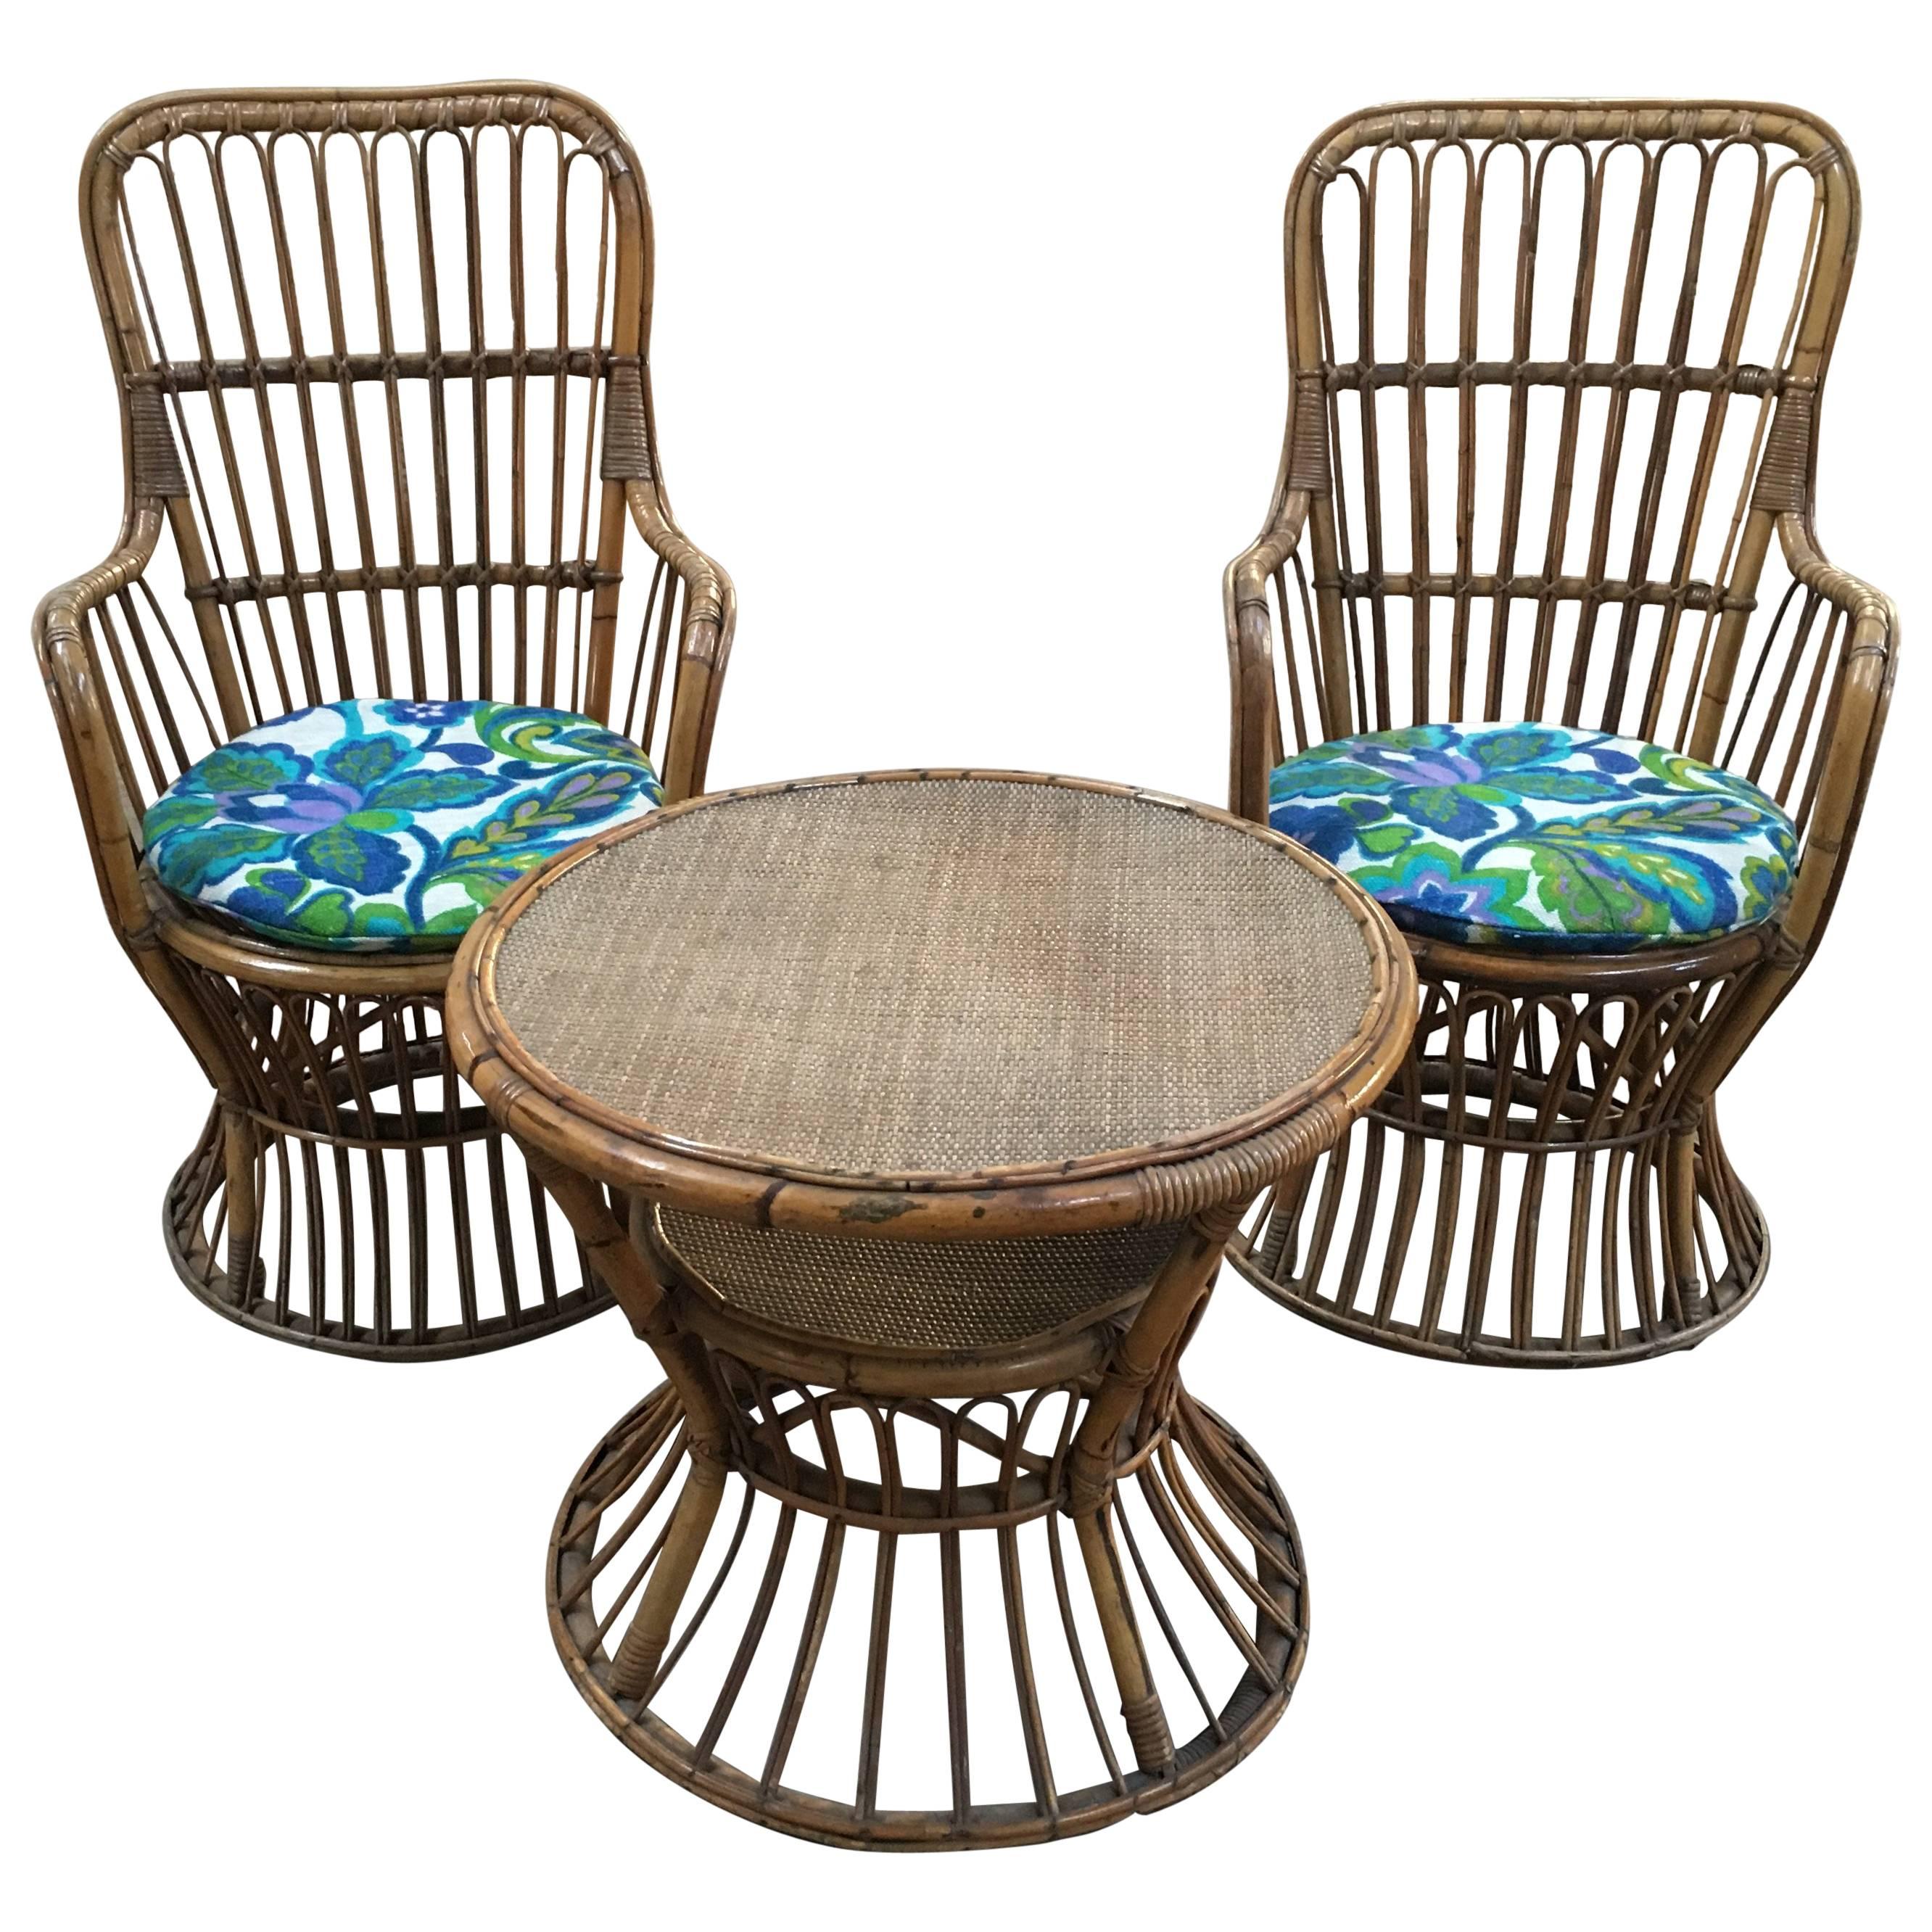 Italian Bamboo and Rattan Living Room Set from 1950s